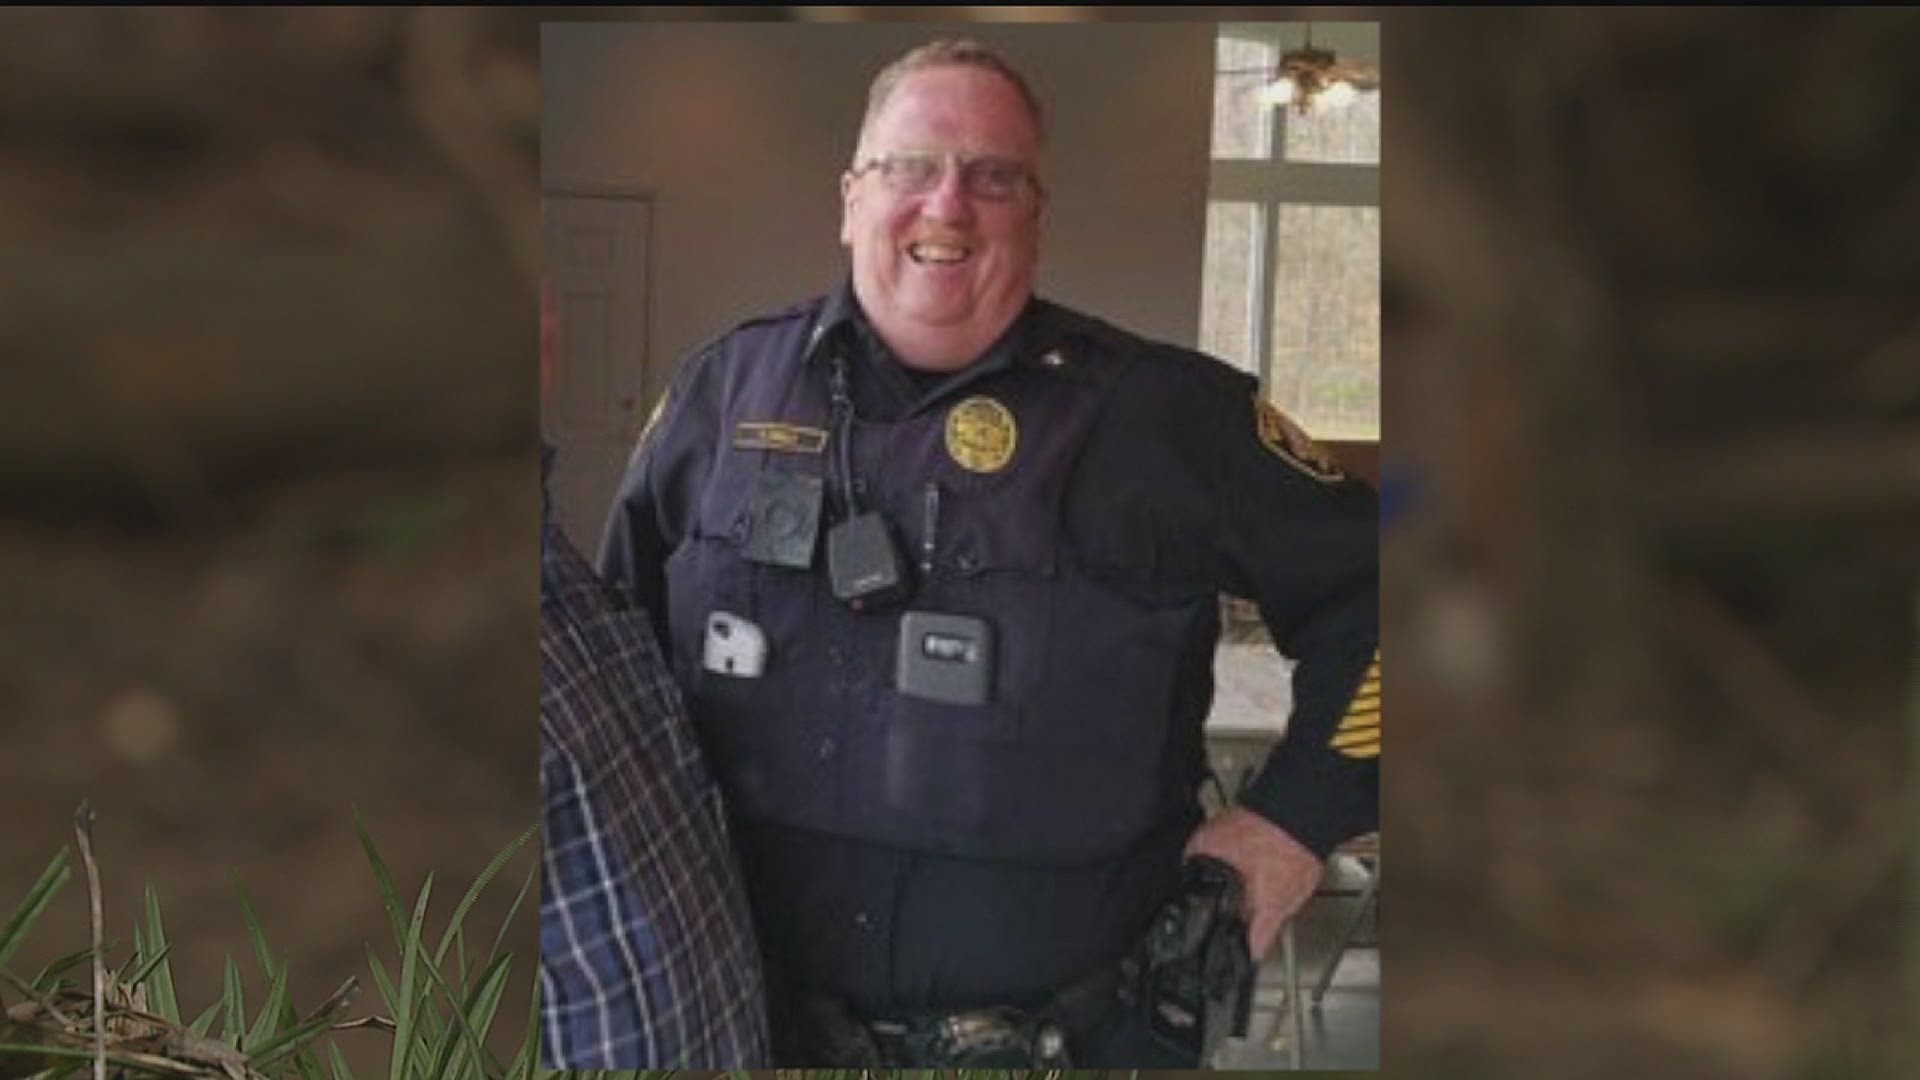 Hampton Police Chief Terry Engle died after police say his car hit a tree.  Witnesses say they reached out to help, one even took his radio to make a call.